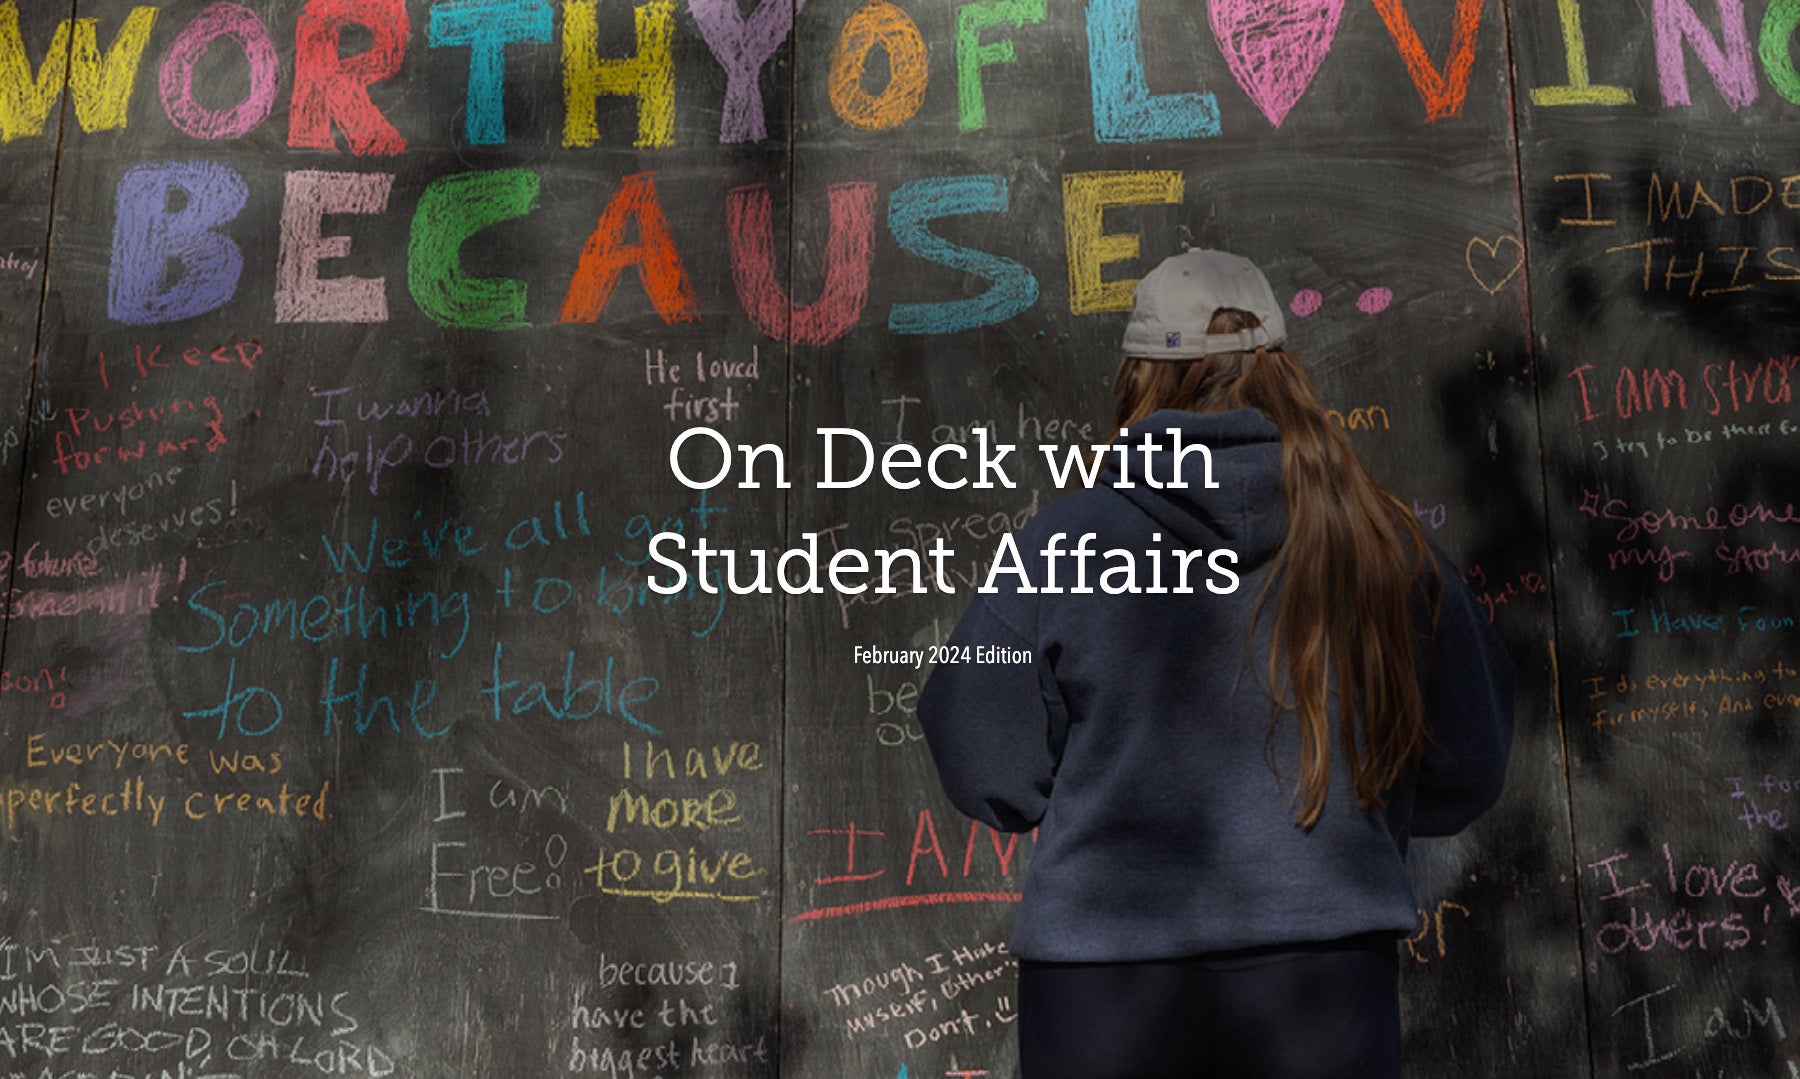 On Deck with Student Affairs